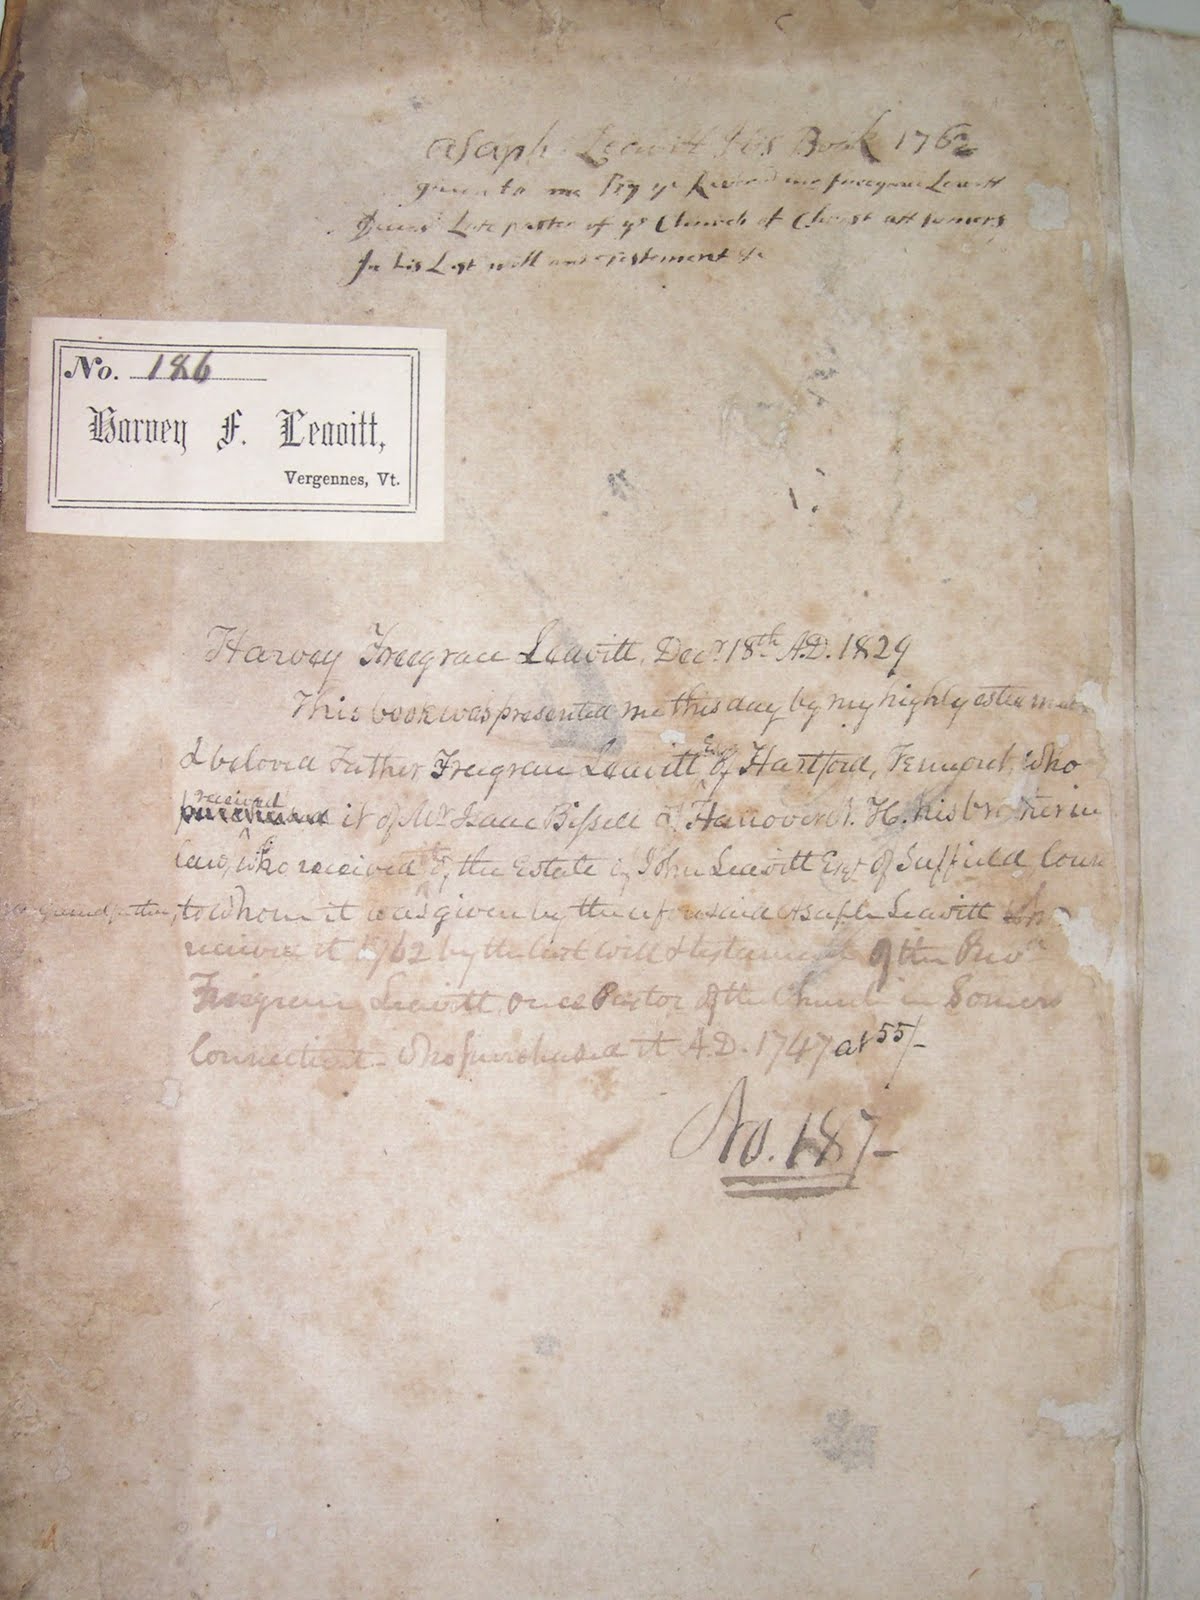 Handwritten script on inside cover of a book, written by Harvey Leavitt, noting the date he was presented with this book